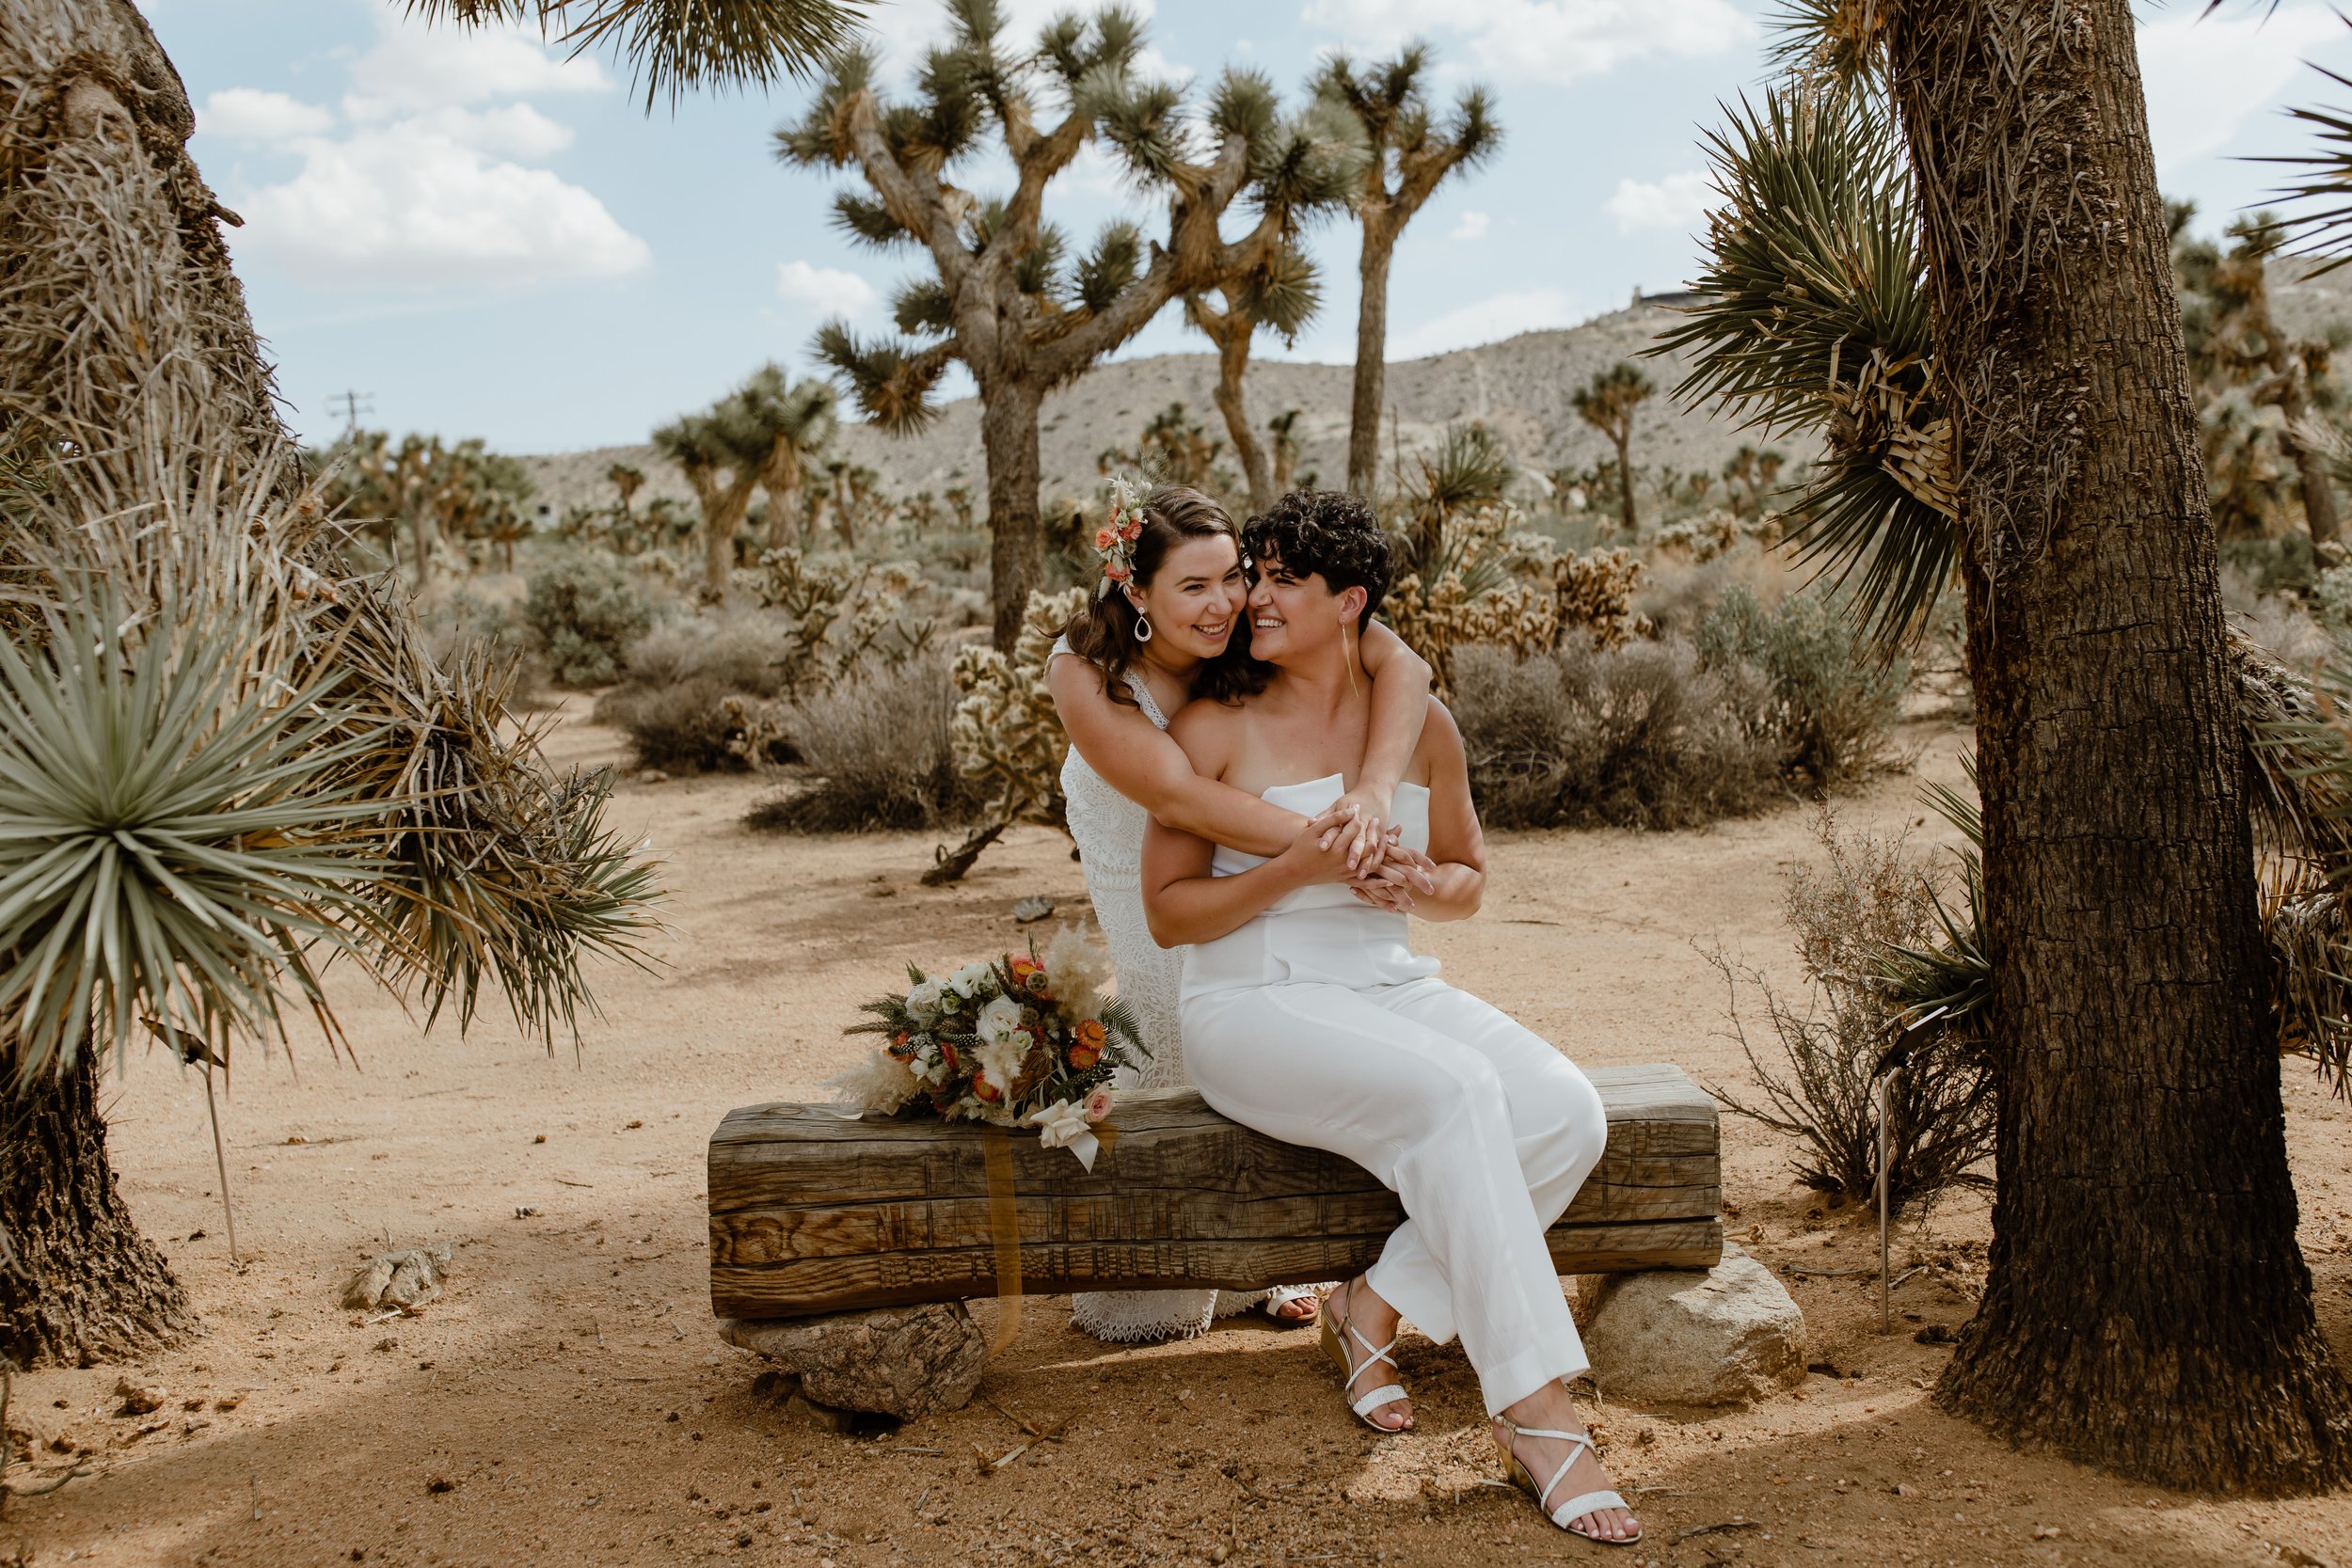  Sydney and Kym's Wedding - Tumbleweed Sanctuary Yucca Valley, CA - Eve Rox Photography 